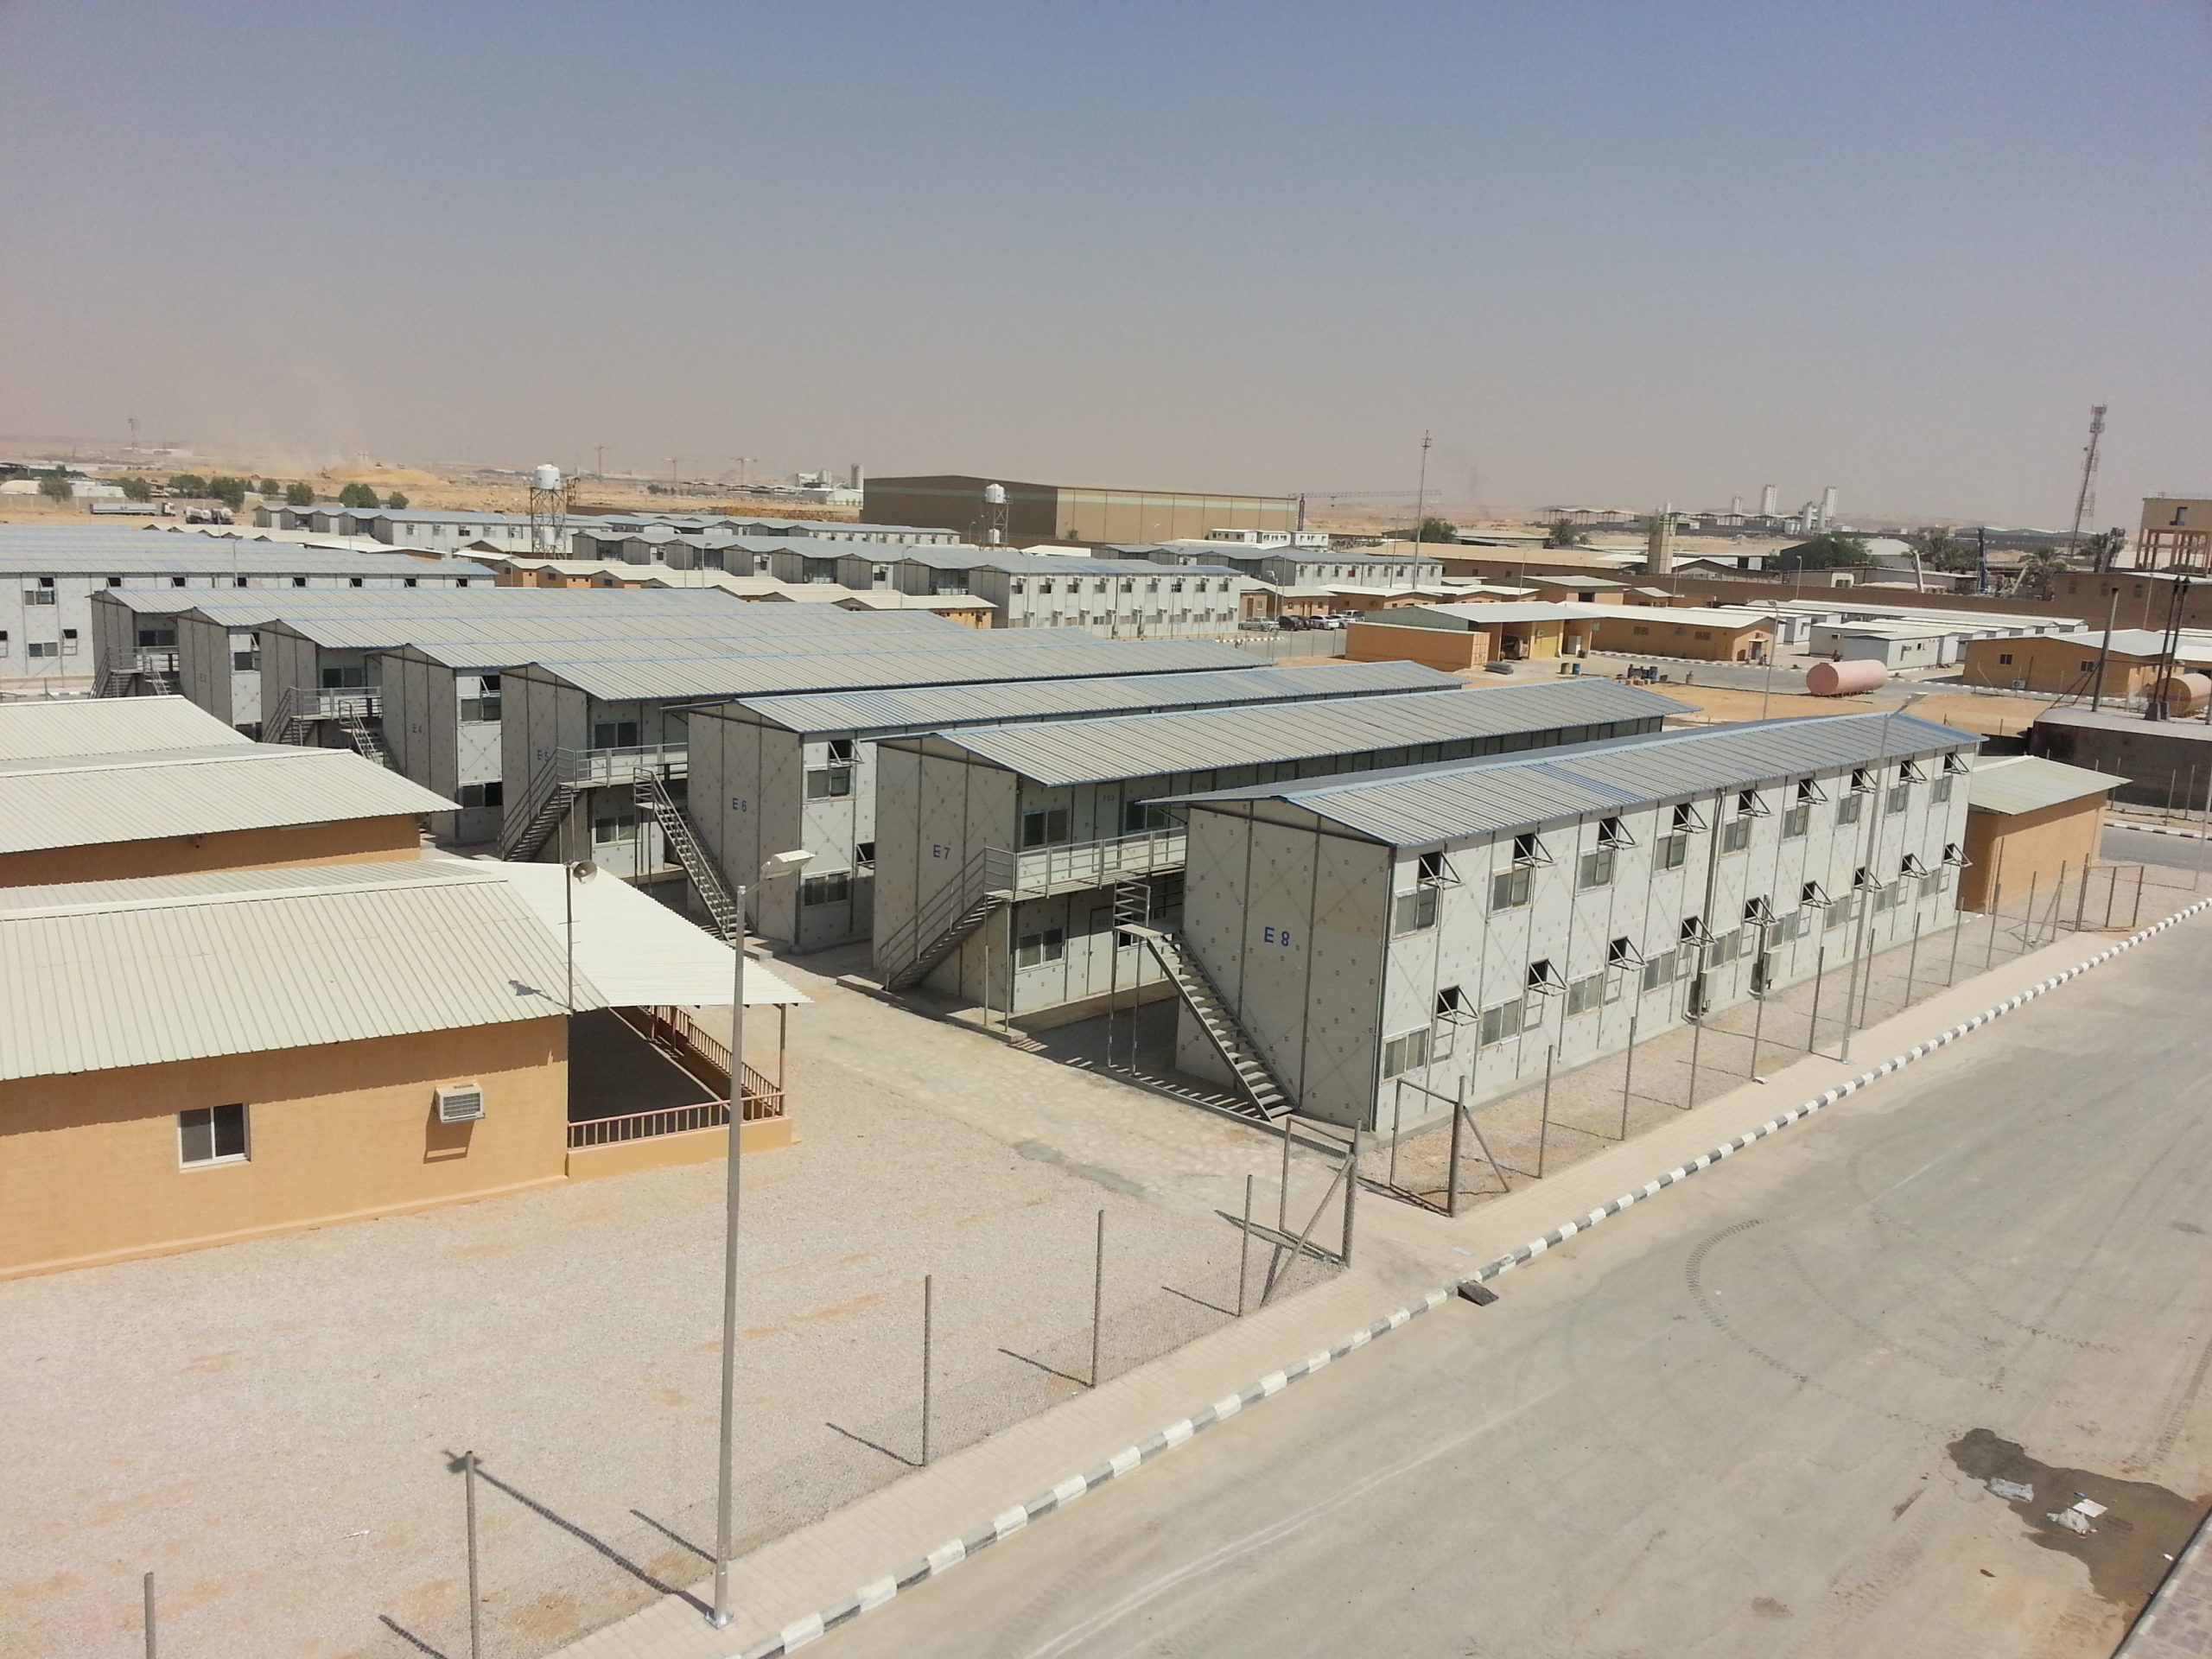 Military adopts Lida Group's deployable protected steel shelters made with composite insulated wall panels for rapid deployment of medical clinics, mobile command centers and other mission critical temporary structures on international disaster relief operations.